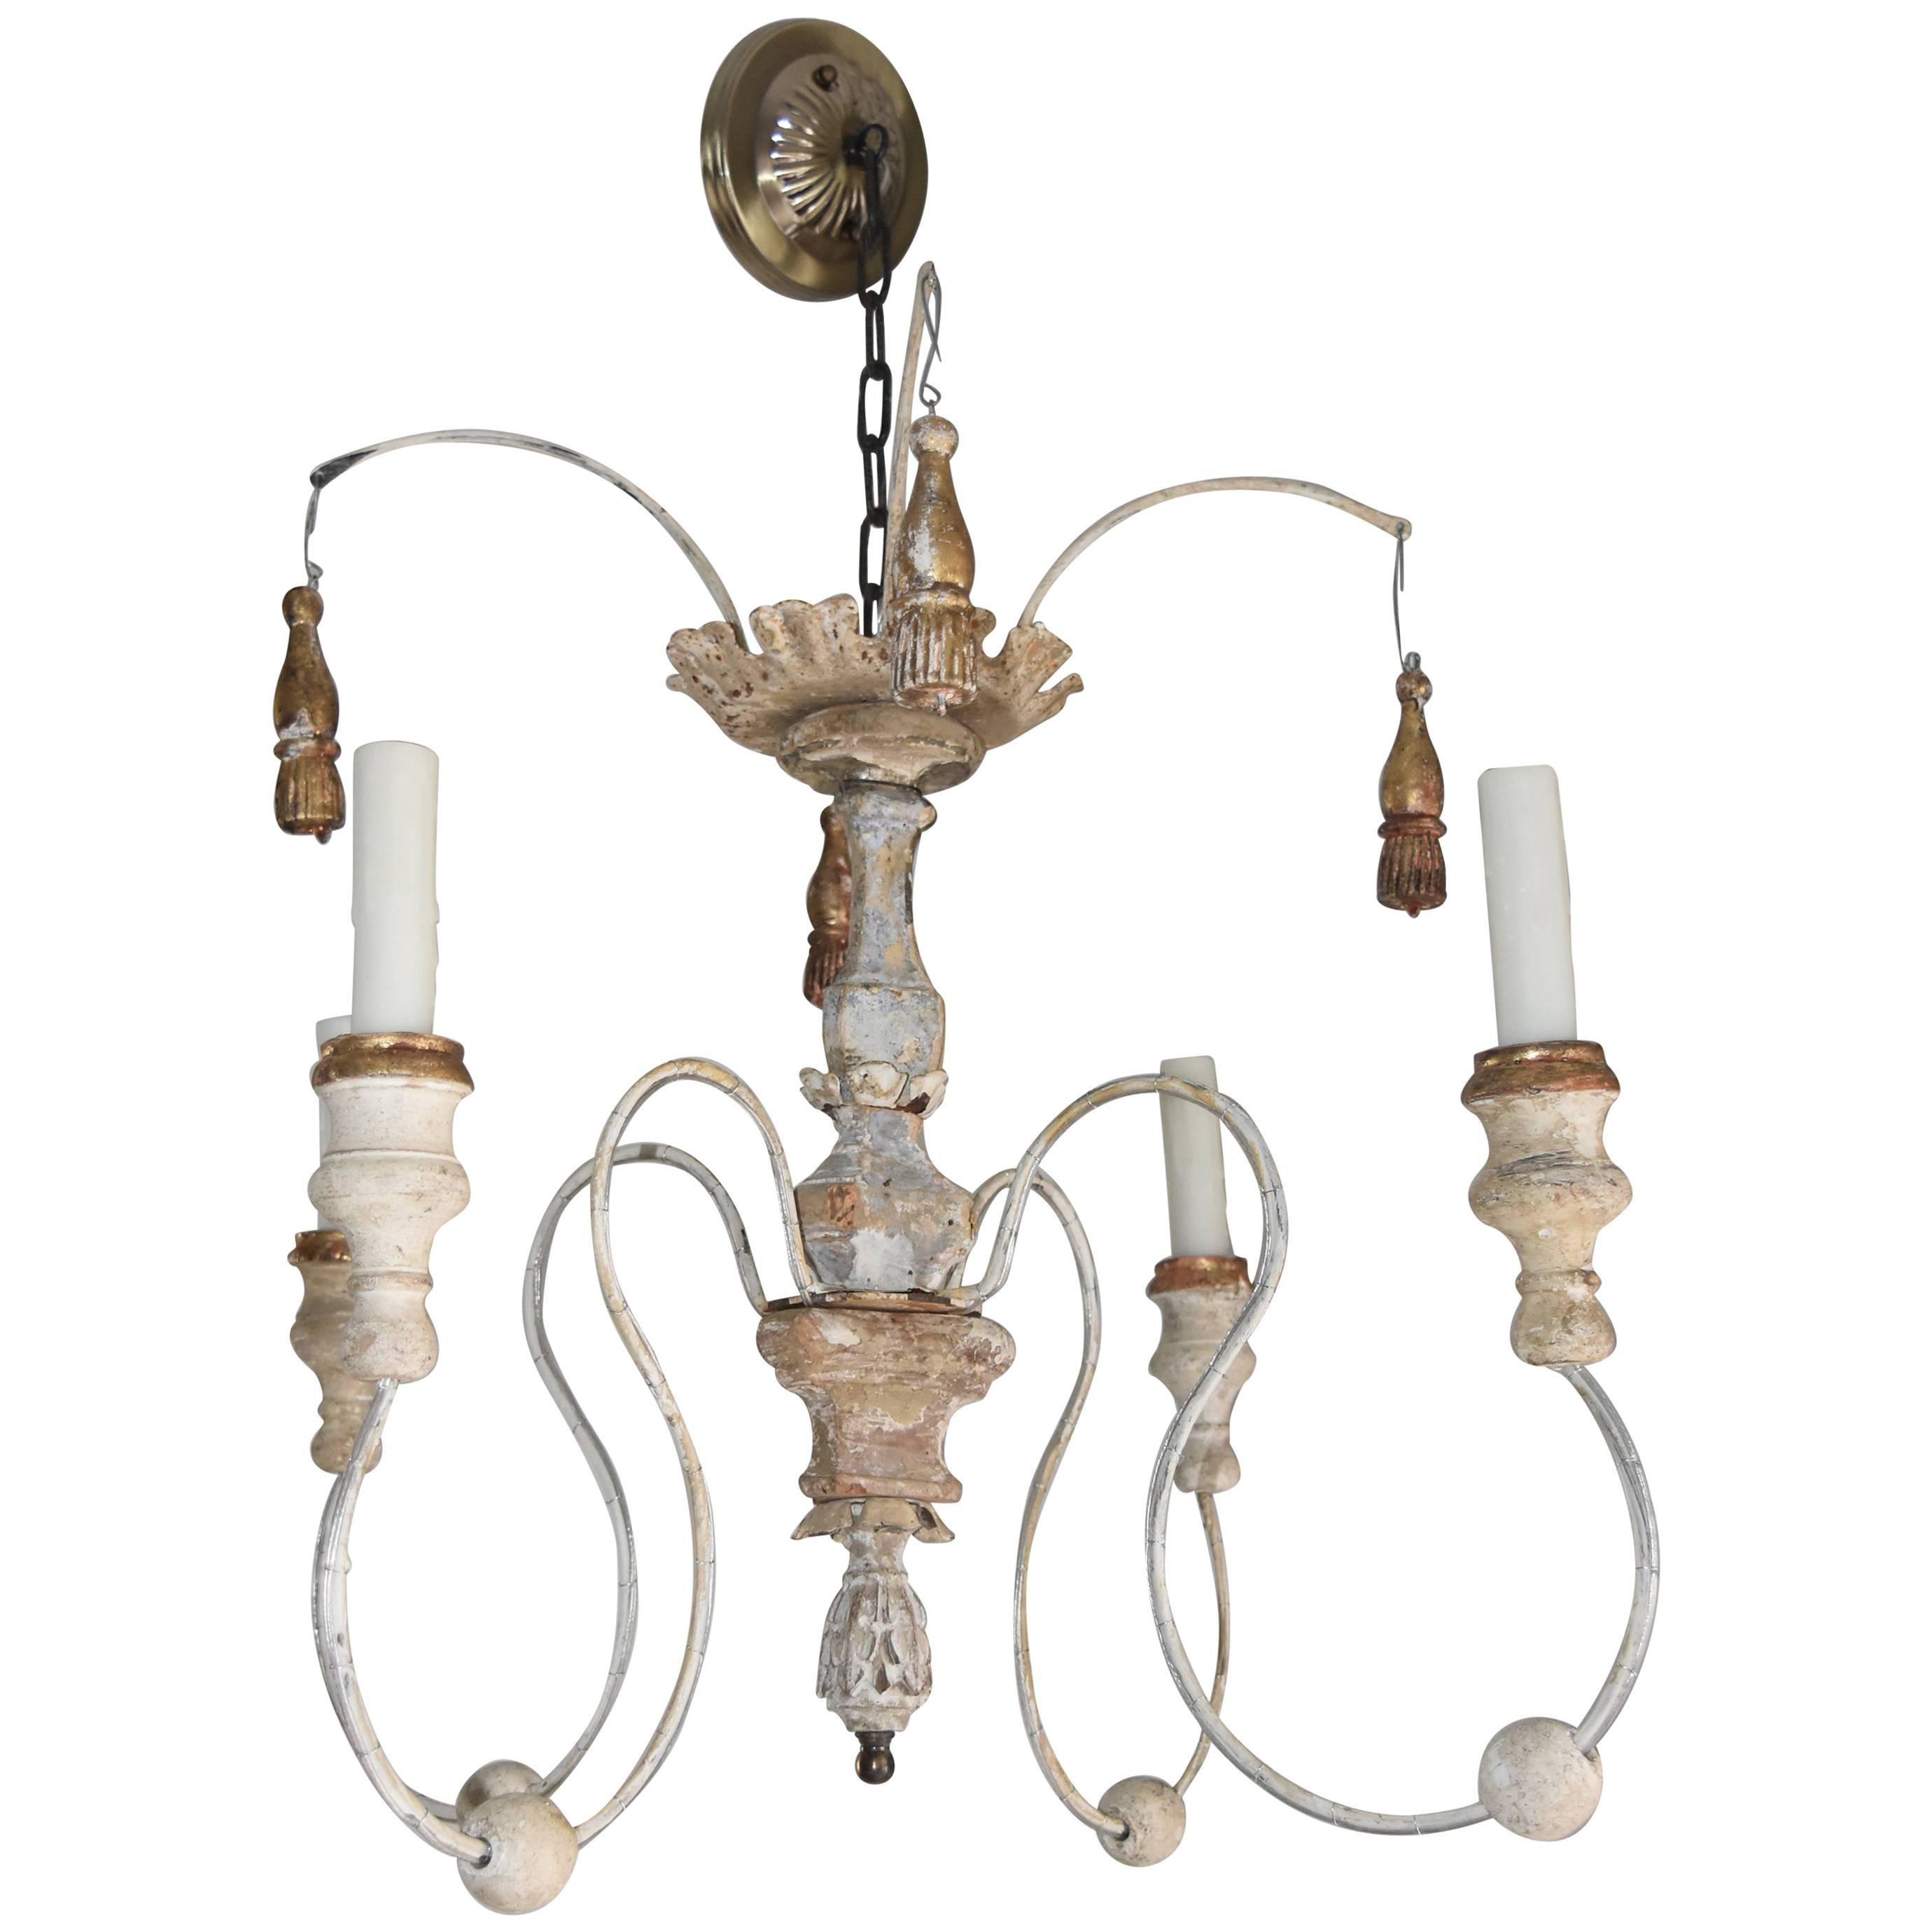 Italian Wooden Altar Elements Spider Chandelier with Iron Arms